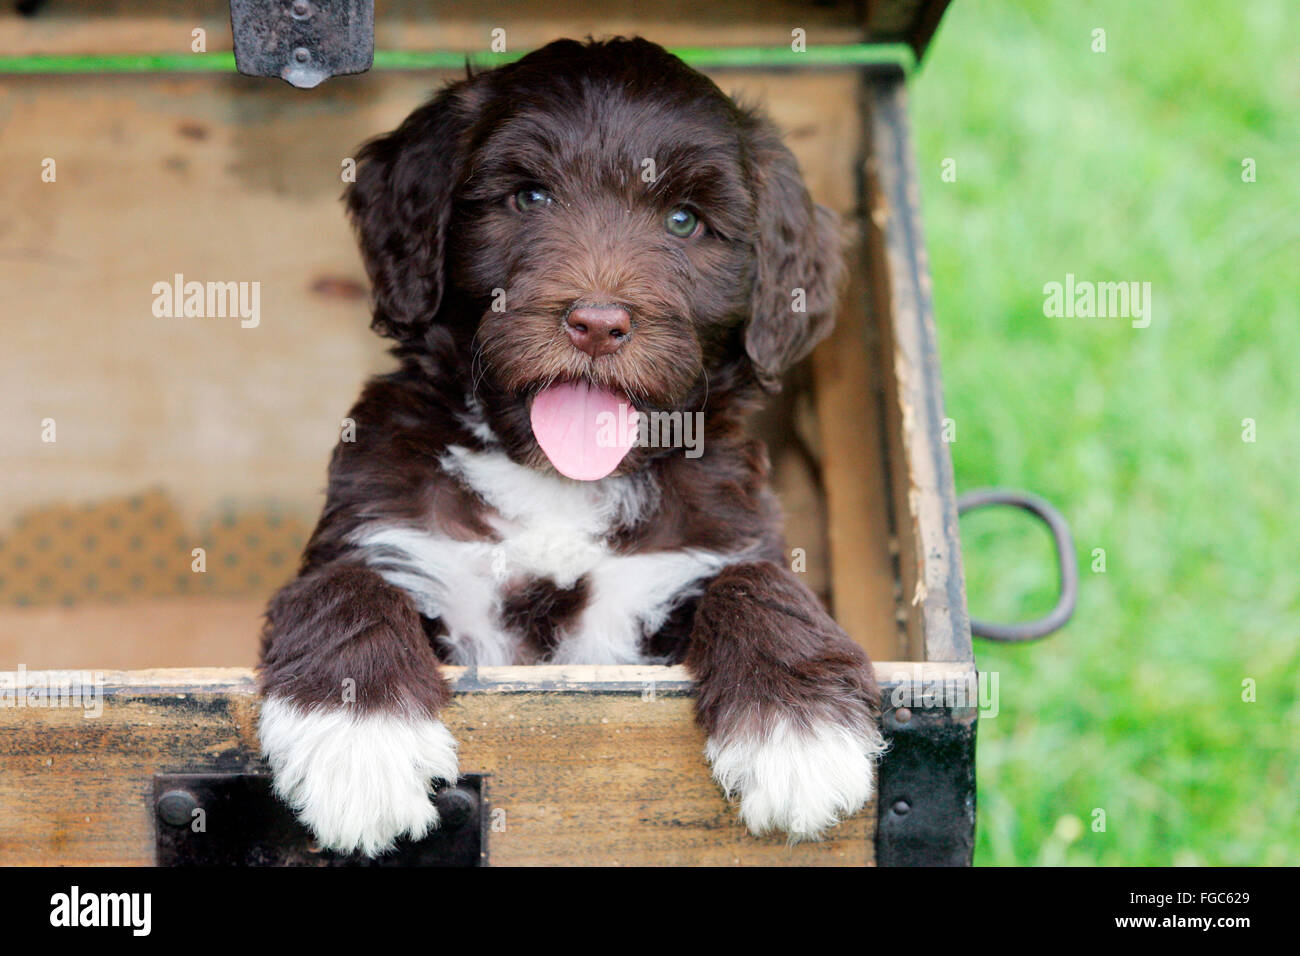 Portuguese Water Dog. Puppy looking out from an old suitcase. Germany..... Stock Photo